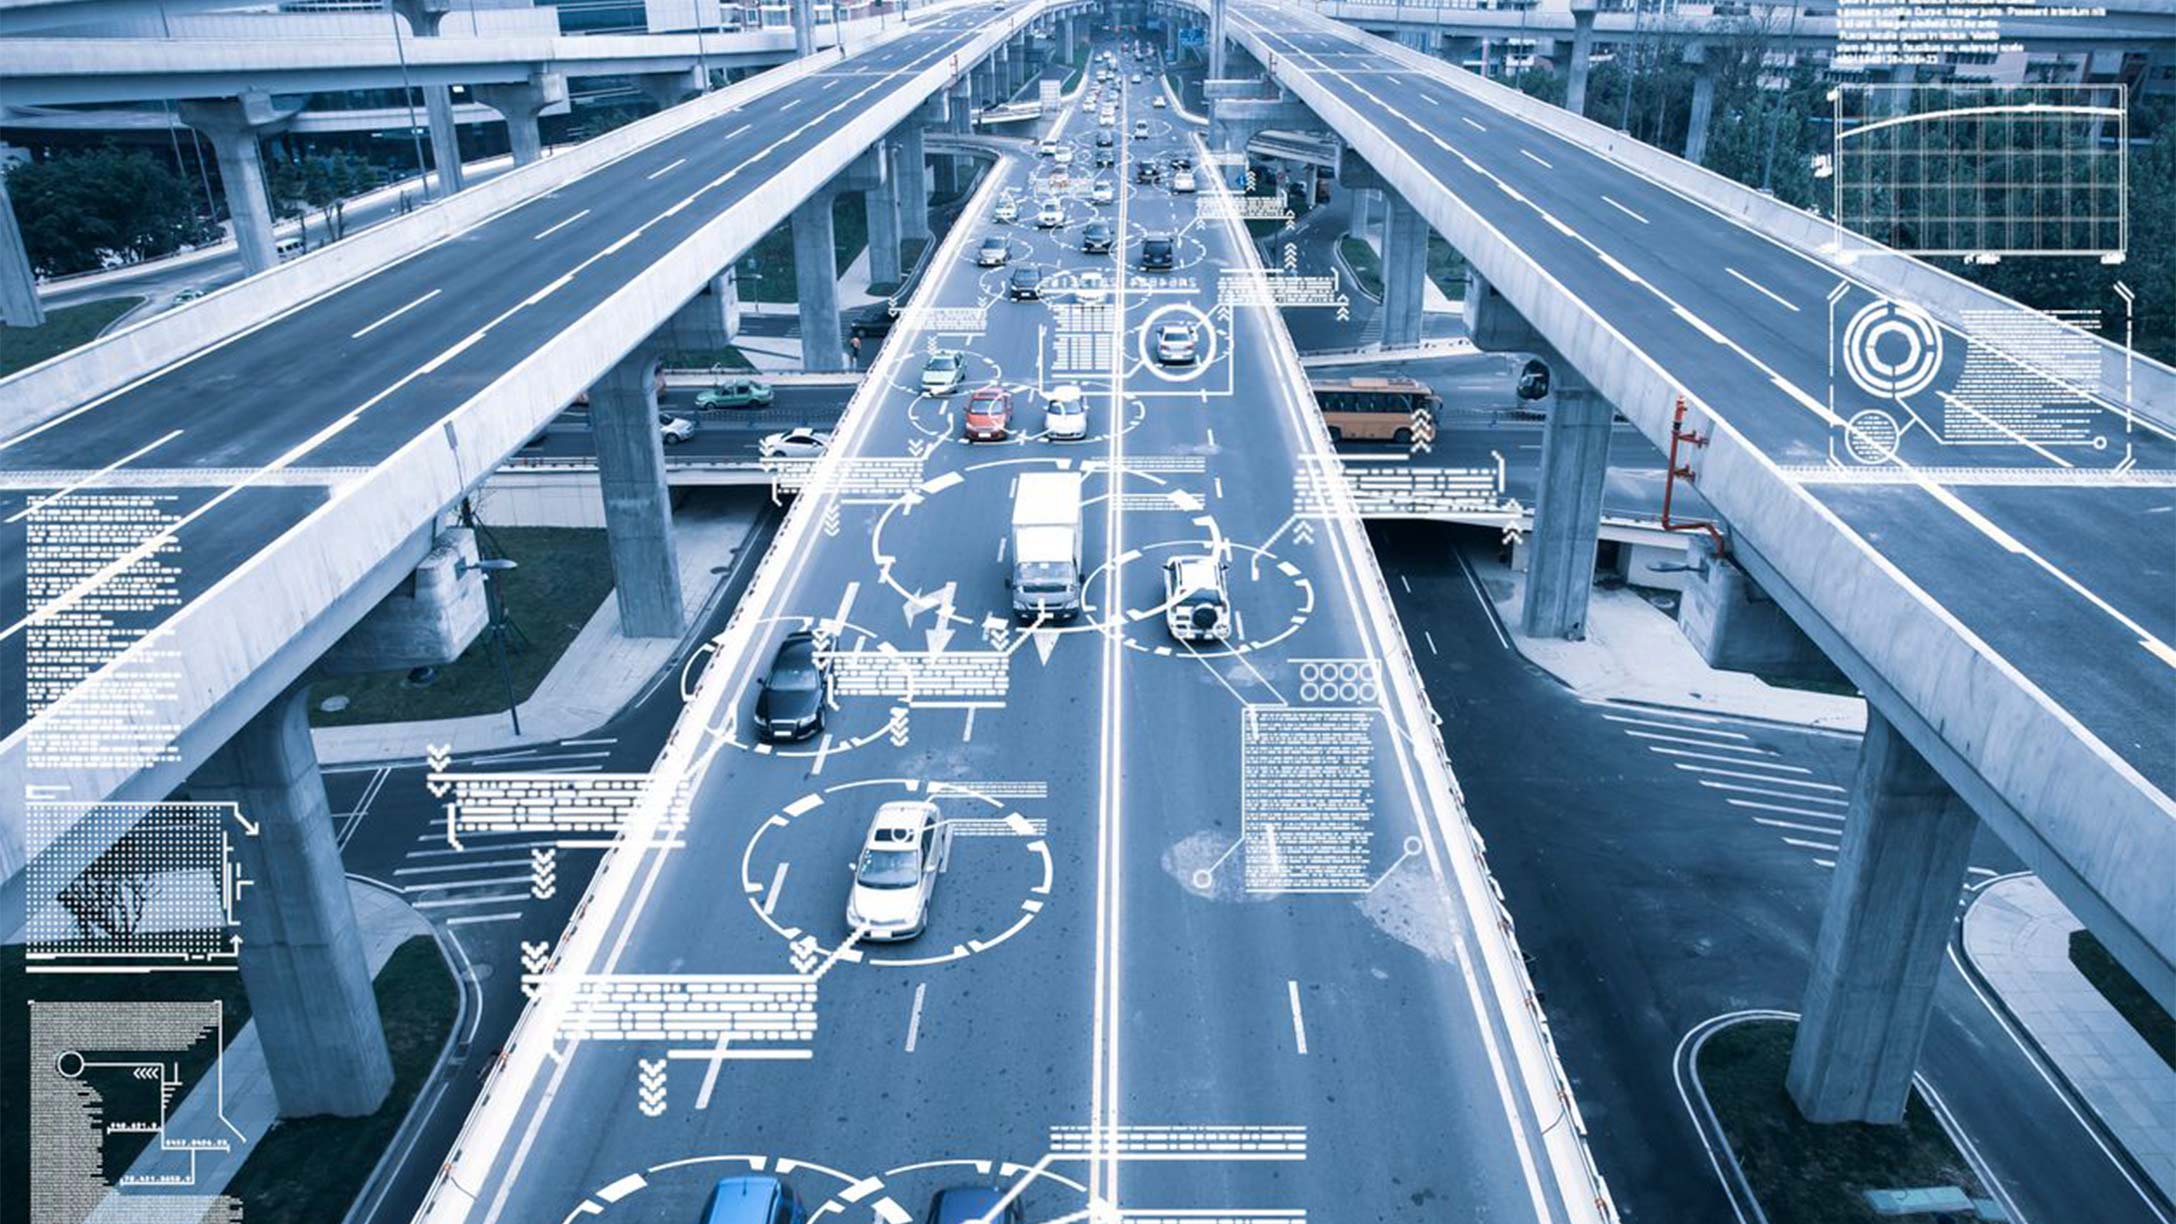 Vehicles driving down a busy road with a futuristic vehicle data overlay on top